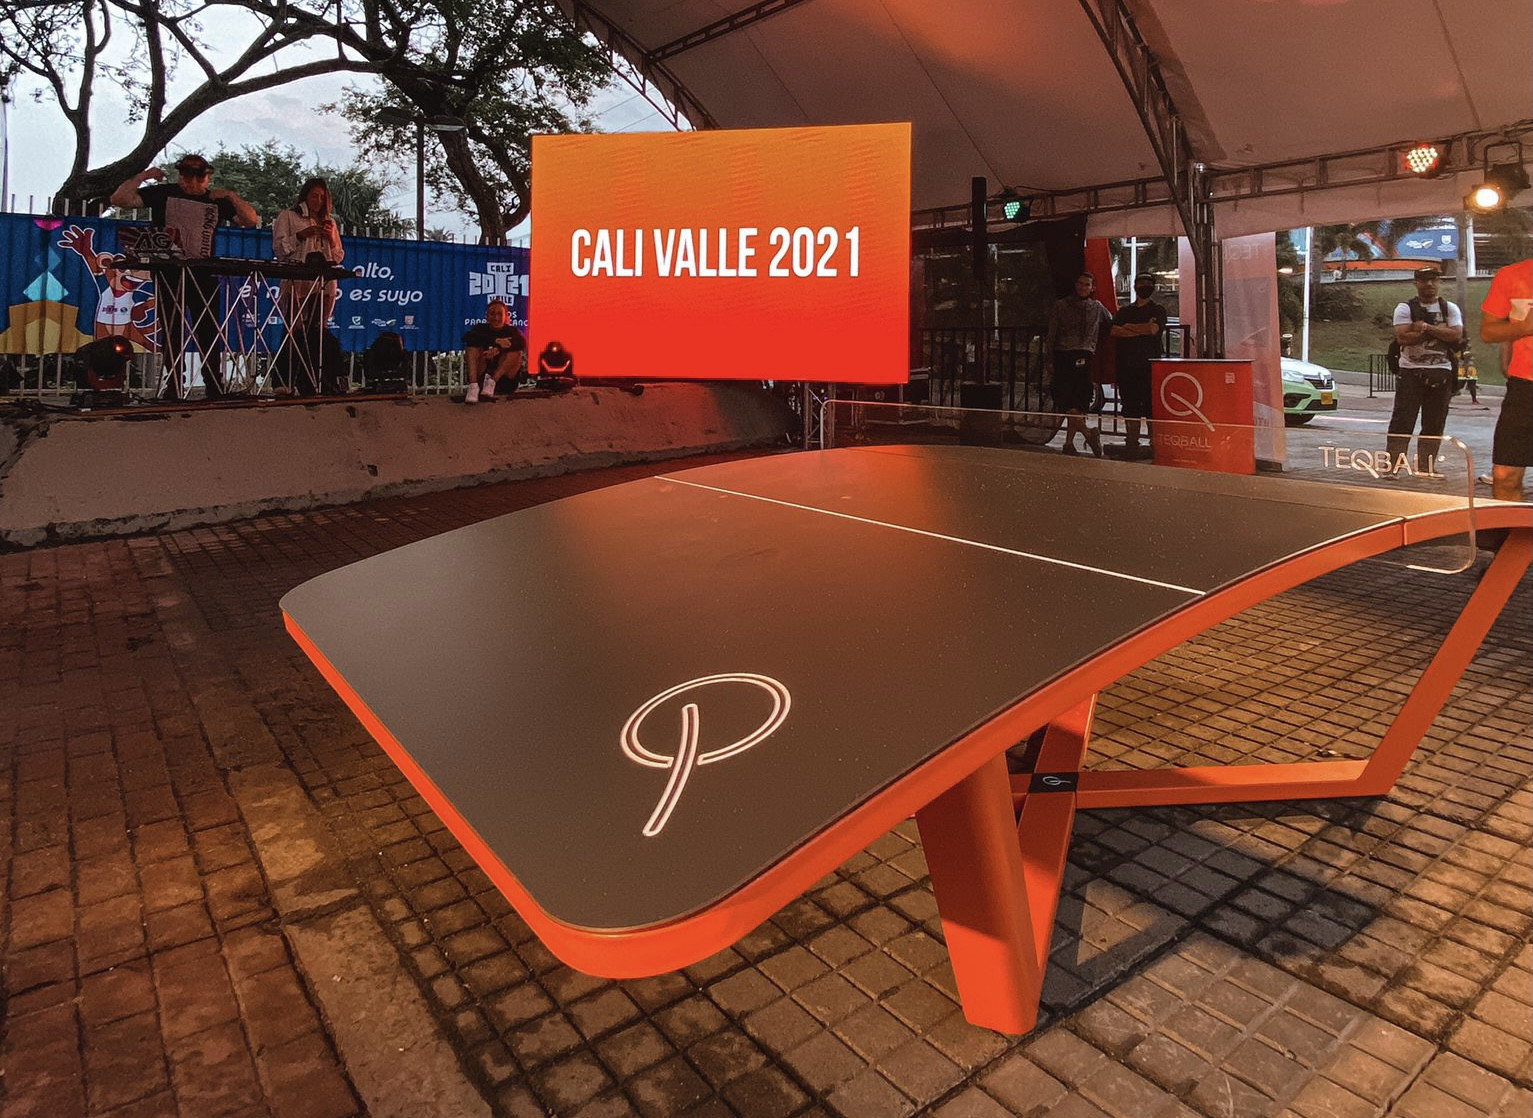 FITEQ stage events at Cali 2021 as teqball features as an exhibition sport